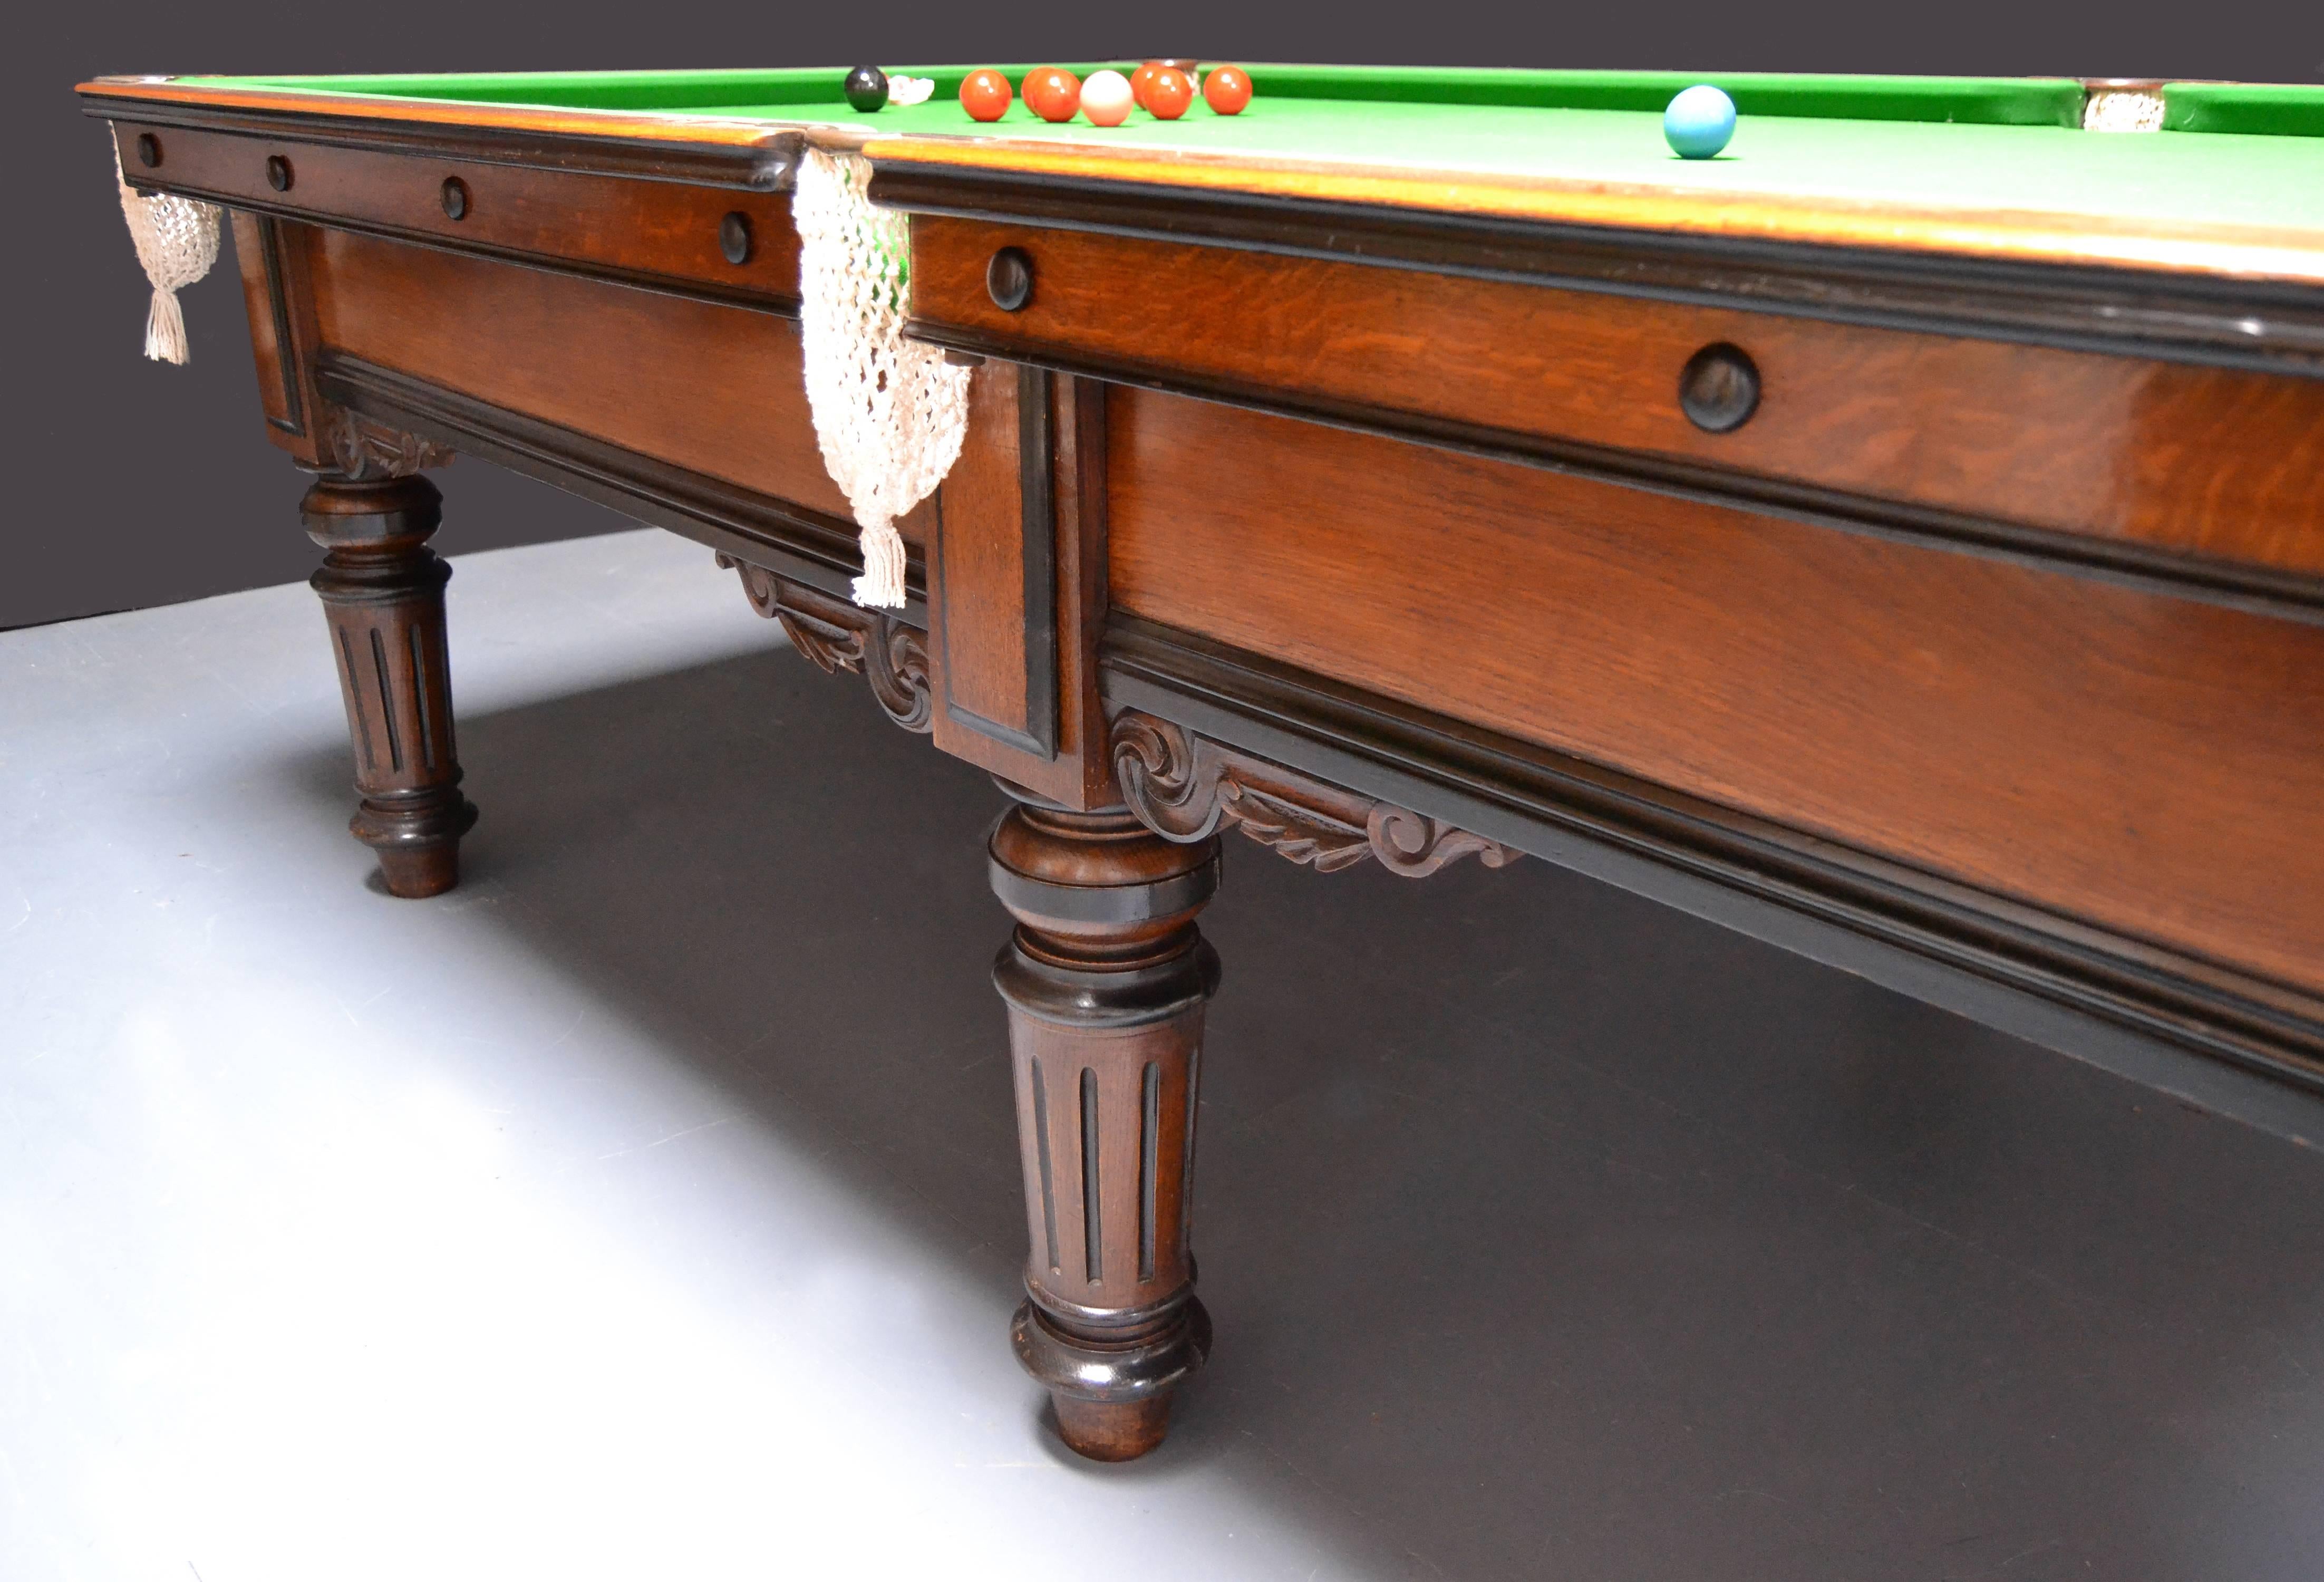 3/4 size snooker table